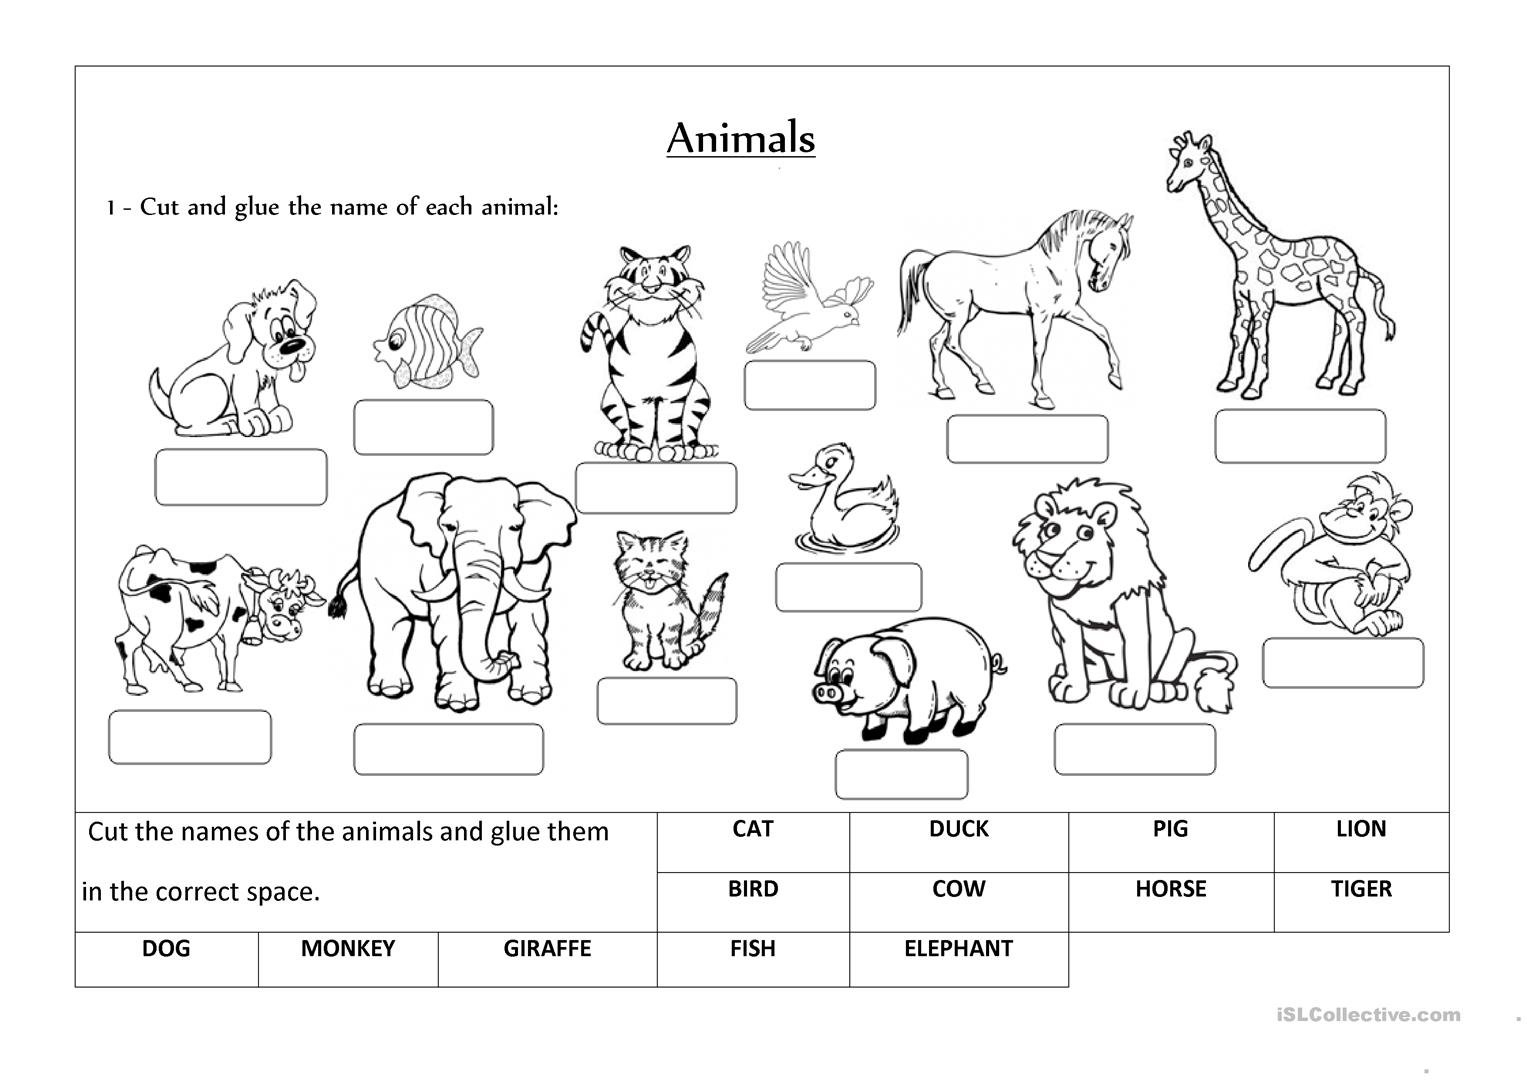 Animals Label And Classify Worksheet  Free Esl Printable Worksheets Intended For Free Animal Classification Worksheets